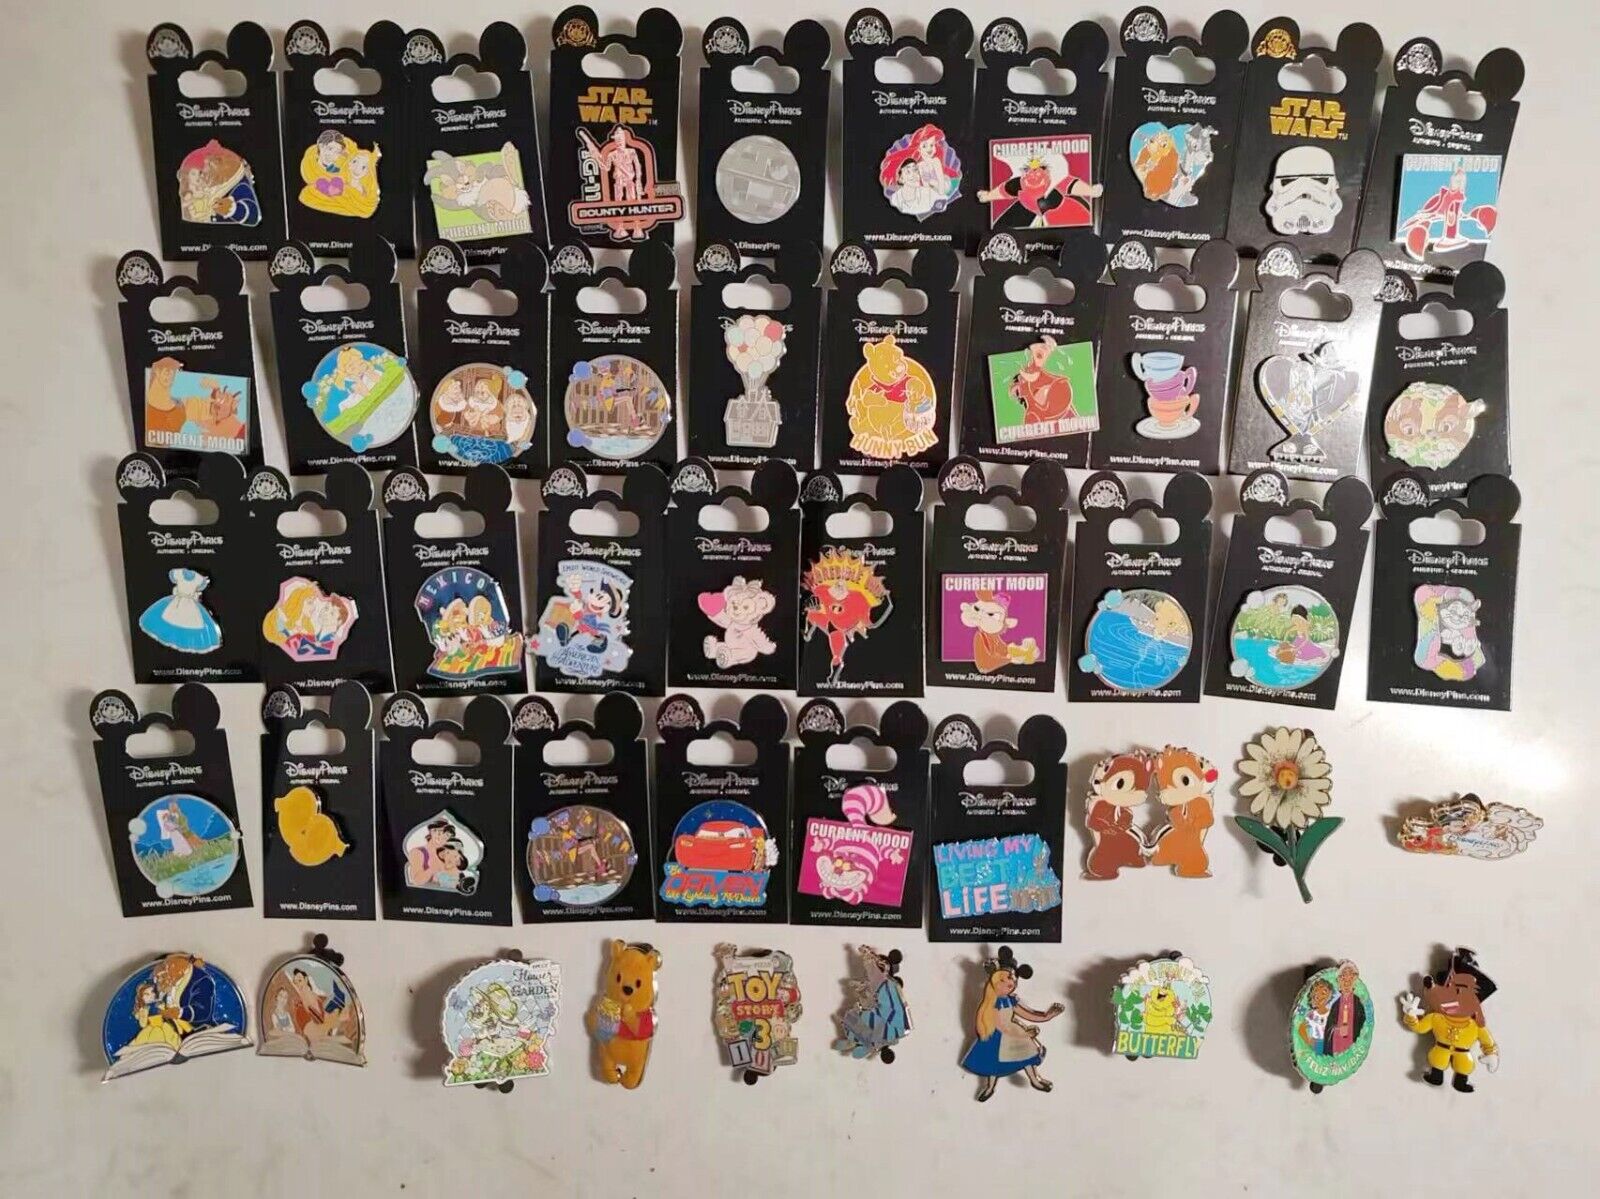 Disney exchange badges come in groups of 50  pins